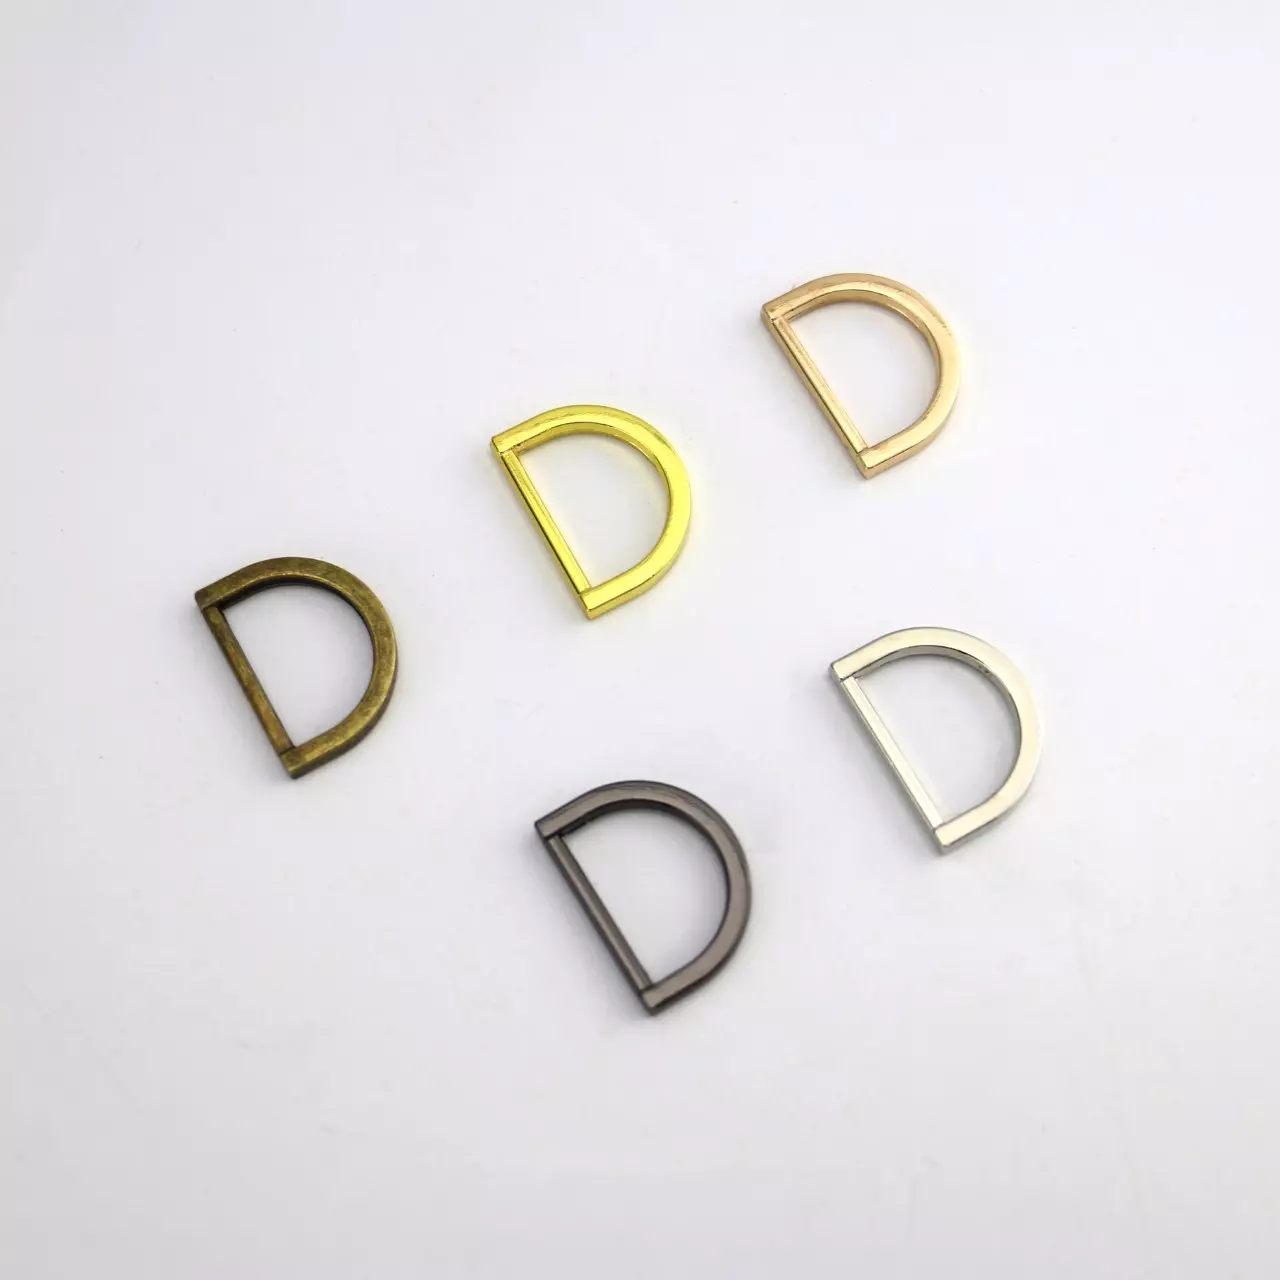 1 Inch Flat Cast D Ring Gold Finish 6 Pieces 25 Mm D-ring 